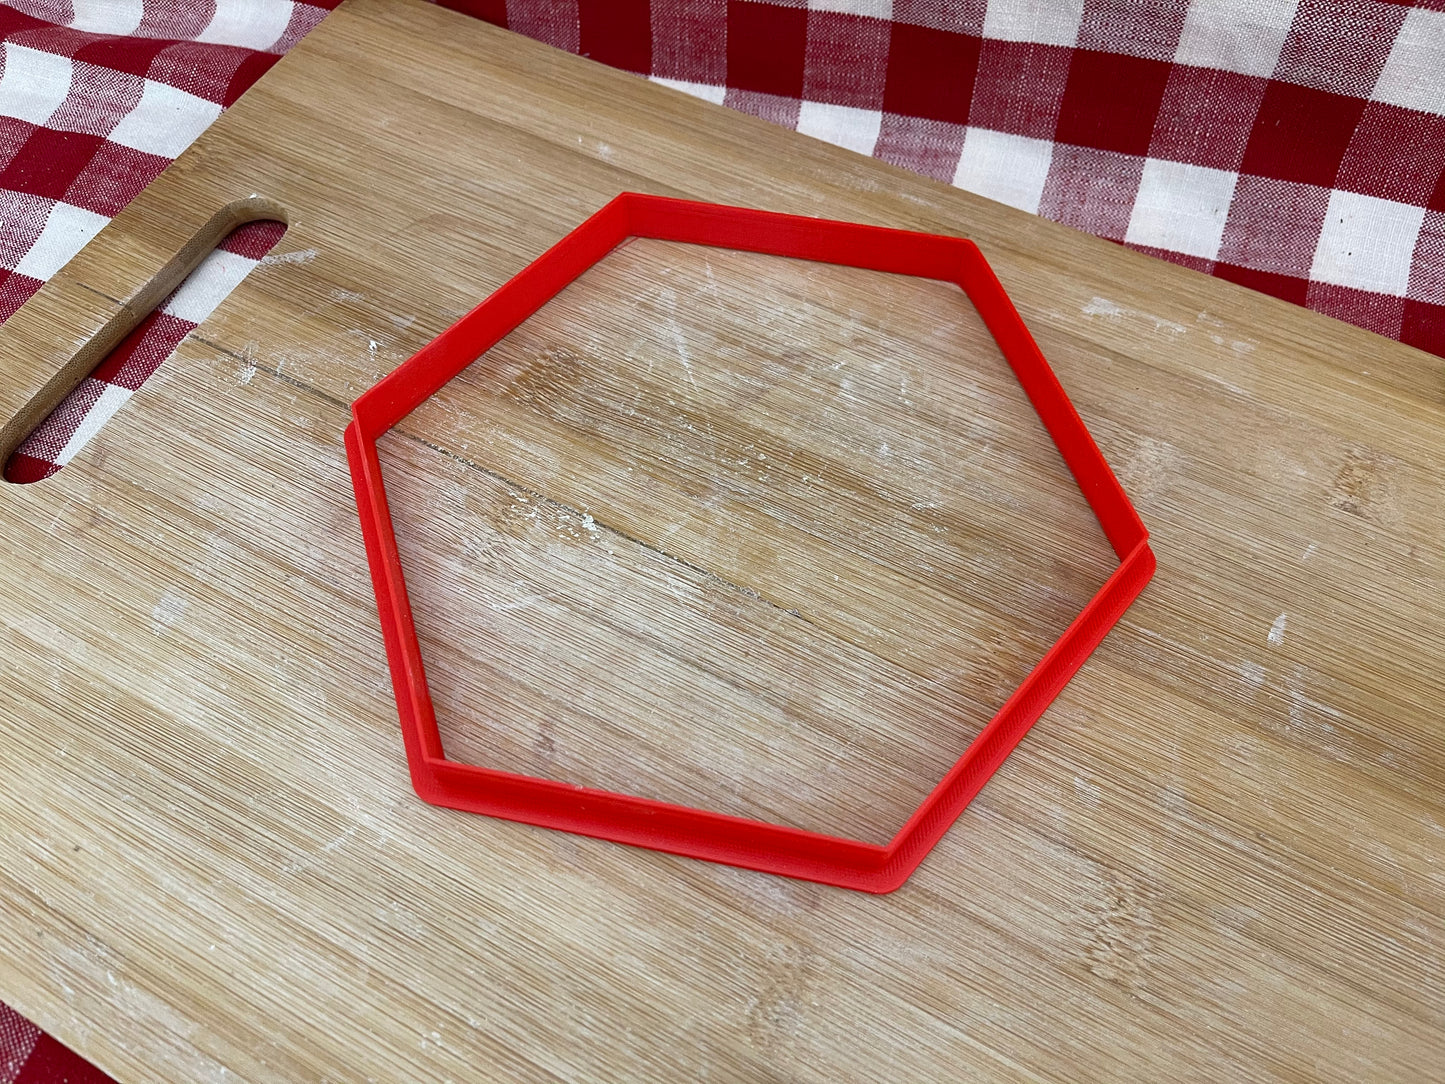 Plain Hexagon, Clay Cutter - plastic 3D printed, XL pottery tool, multiple sizes